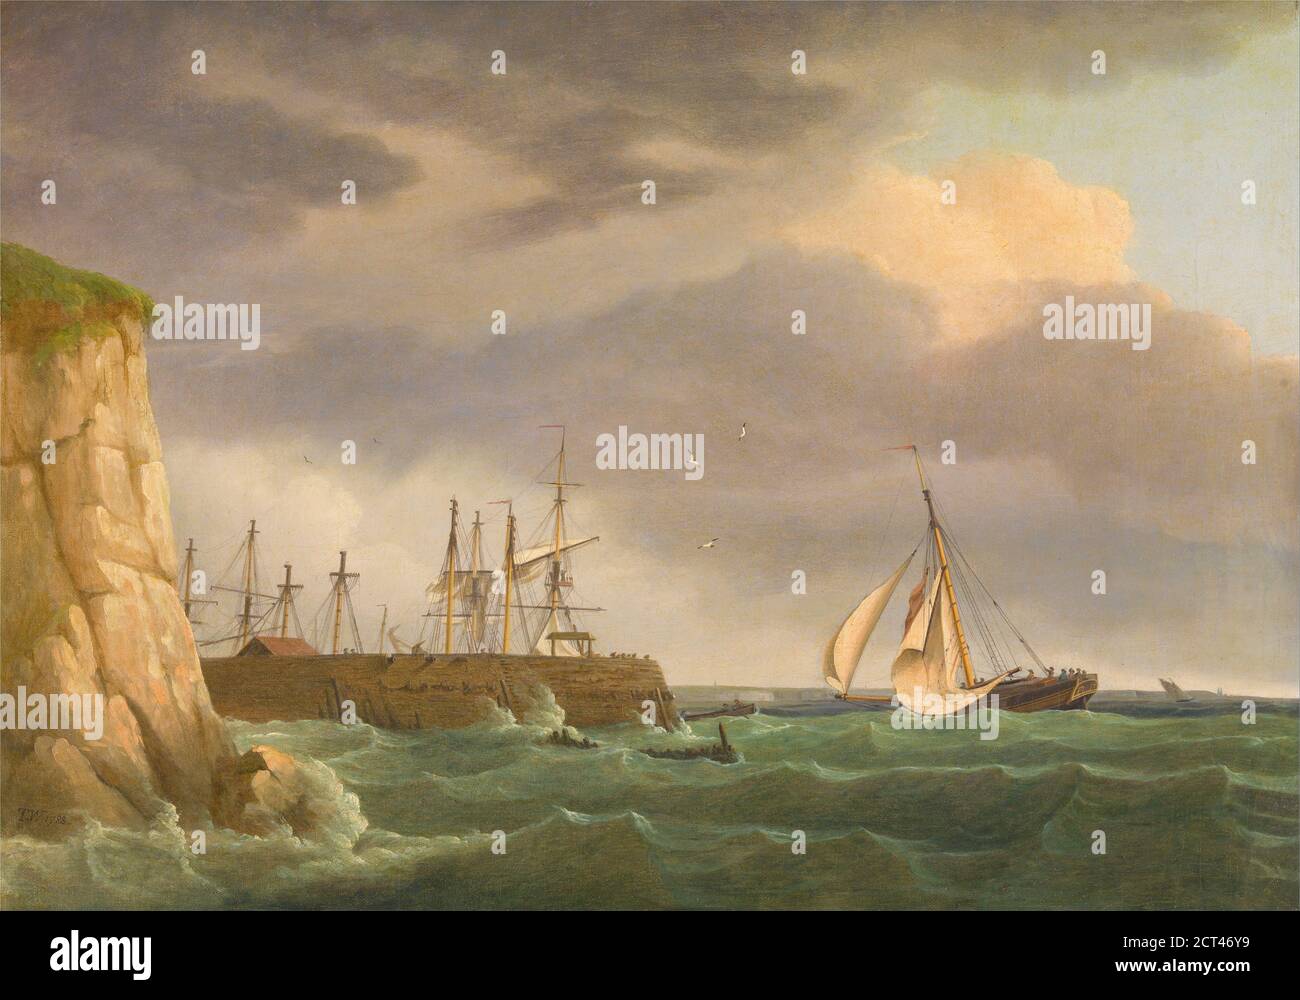 A Ship Running into Harbour with Other Crafts at a Jetty By Thomas Whitcombe (possibly 19 May 1763 – c. 1824) was a prominent British maritime painter of the Napoleonic Wars. Among his work are over 150 actions of the Royal Navy, and he exhibited at the Royal Academy, the British Institution and the Royal Society of British Artists. His pictures are highly sought after today. Stock Photo